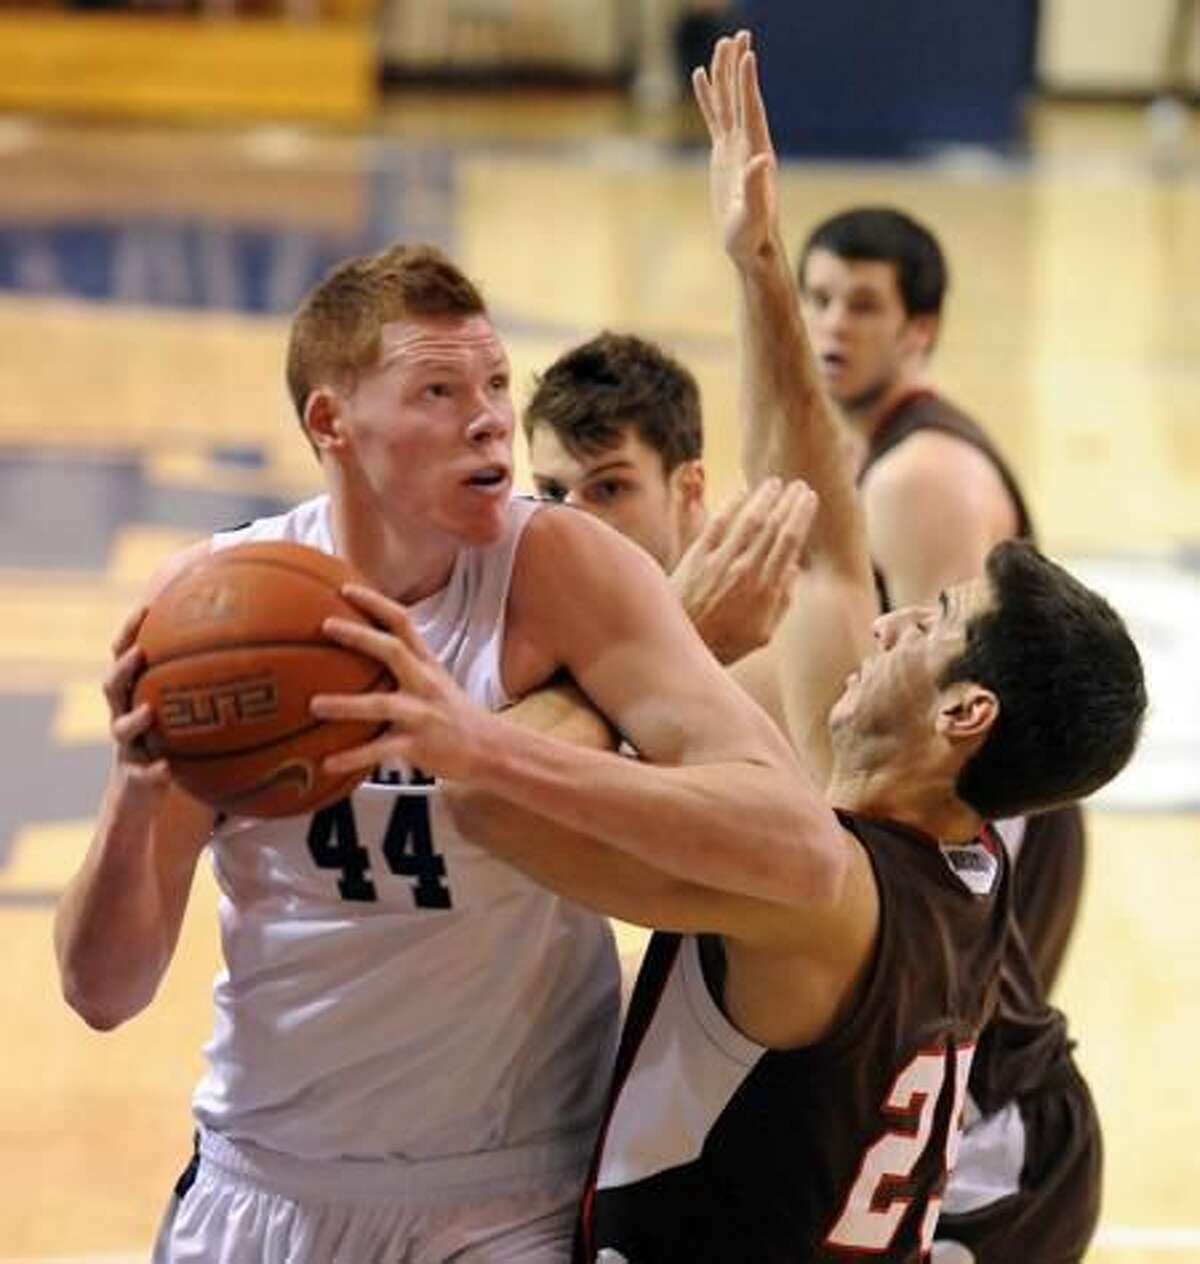 File photo by Mara Lavitt/Register Yale's Greg Mangano powers his way inside in a game against Brown.